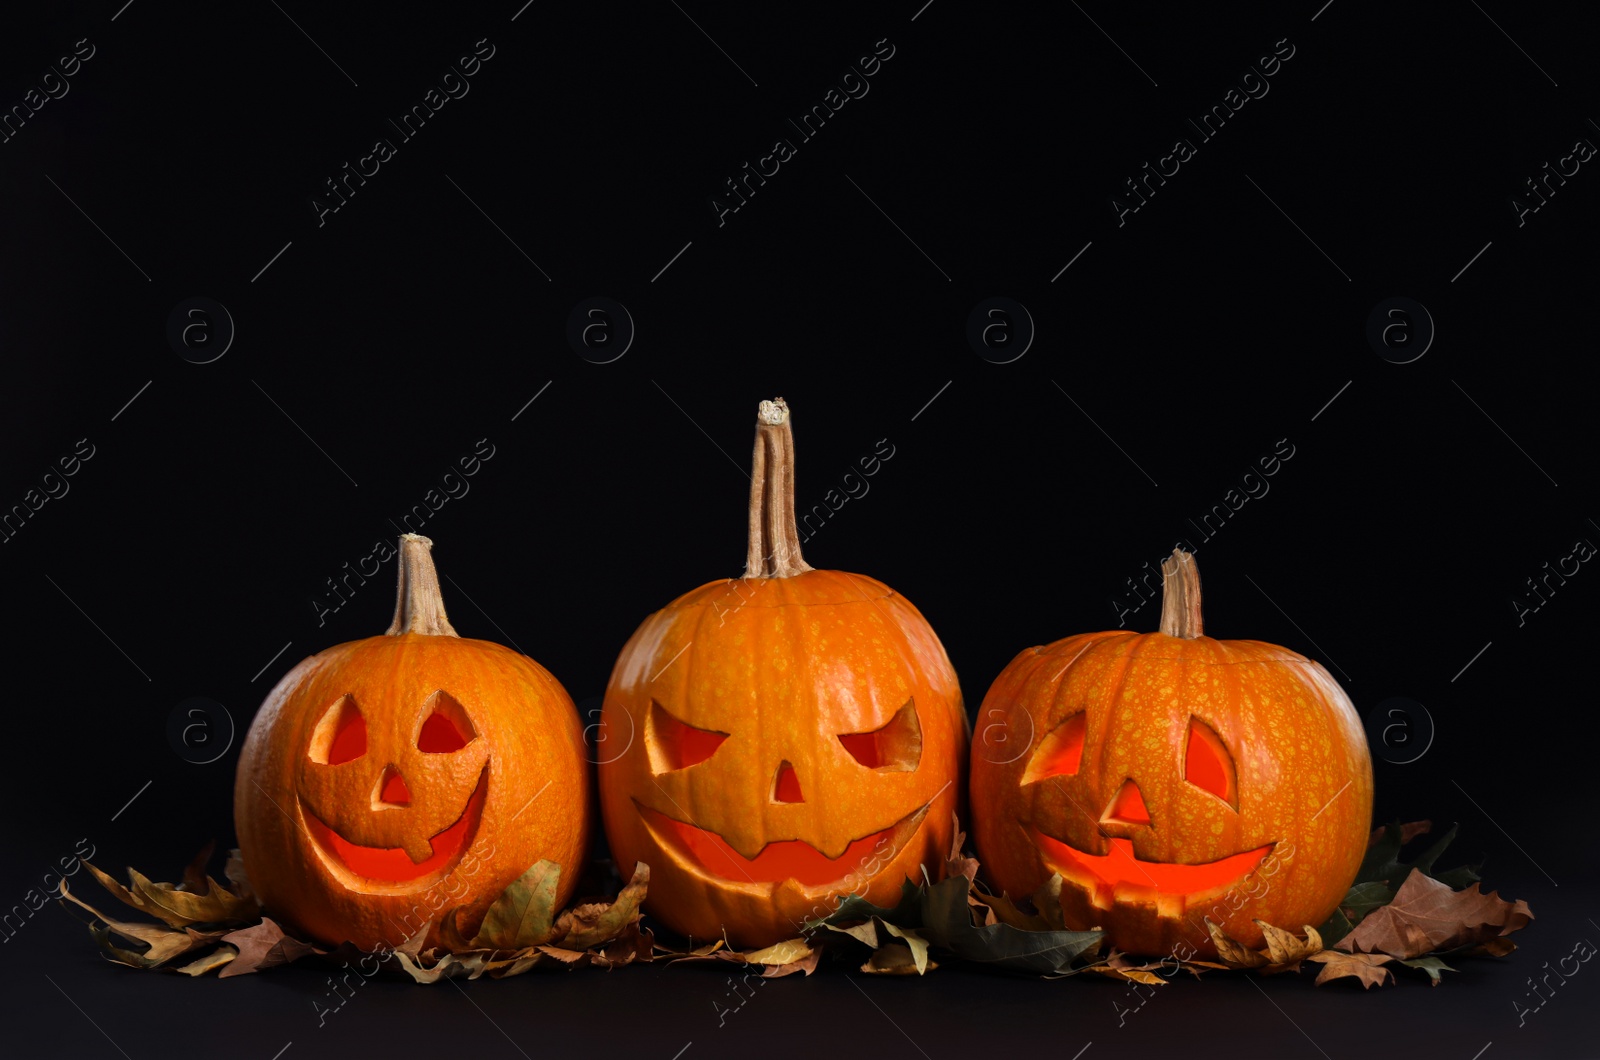 Photo of Pumpkin heads with autumn leaves on black background. Jack lantern - traditional Halloween decor